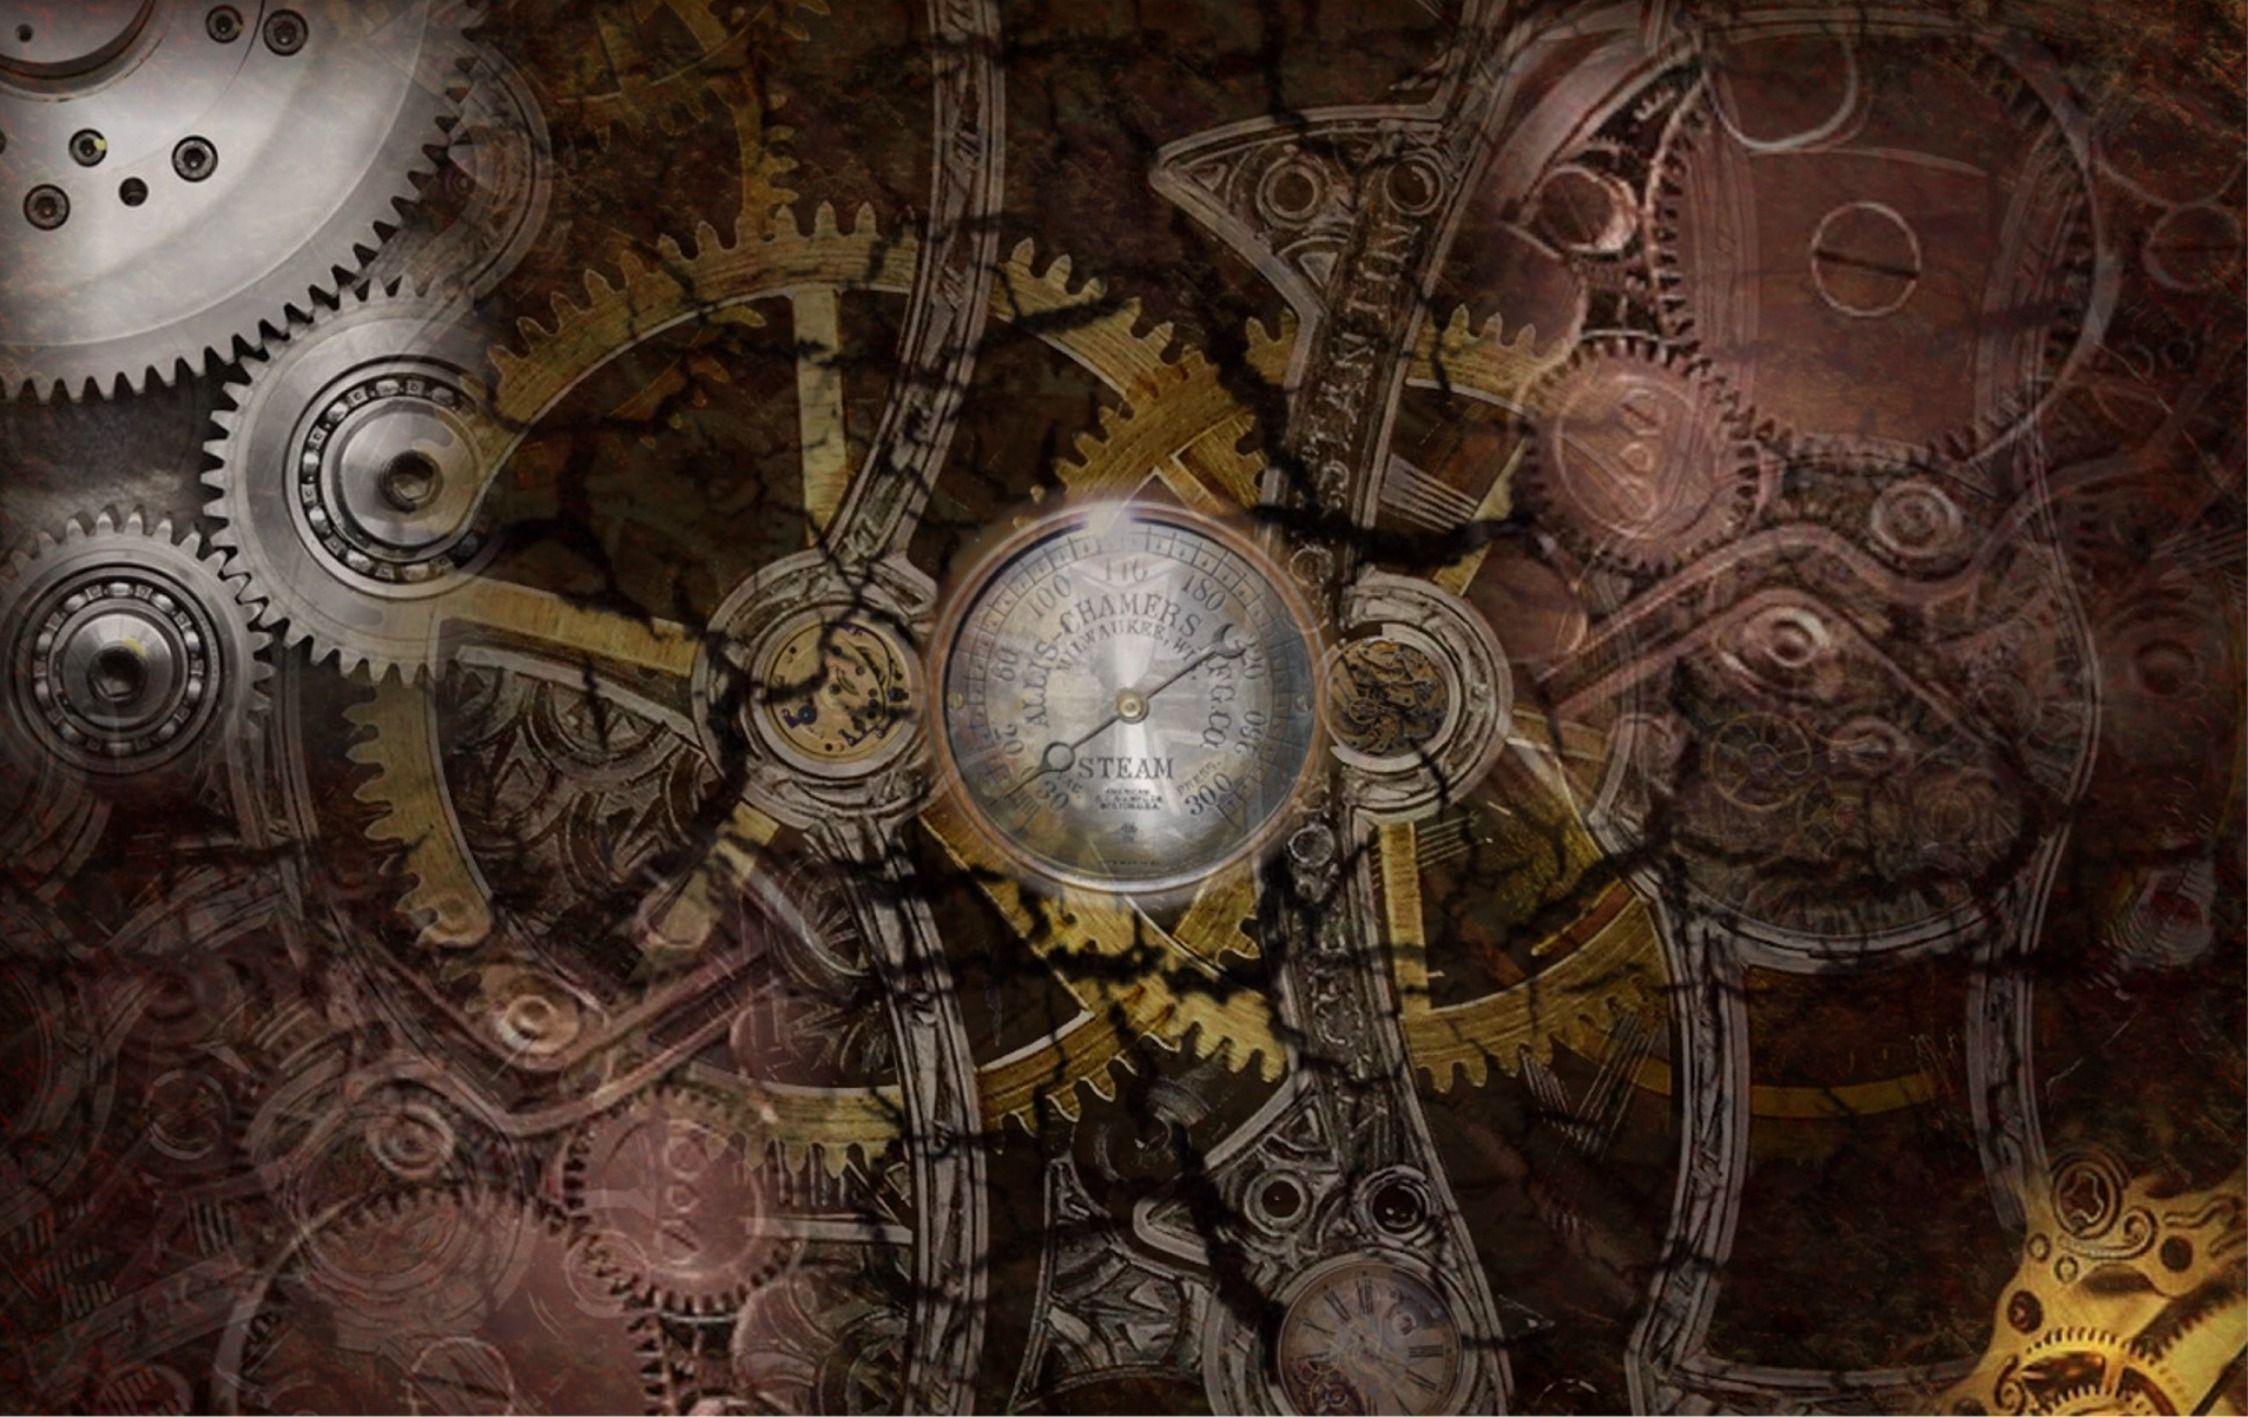 An image of a clock surrounded by gears and cogs - Steampunk